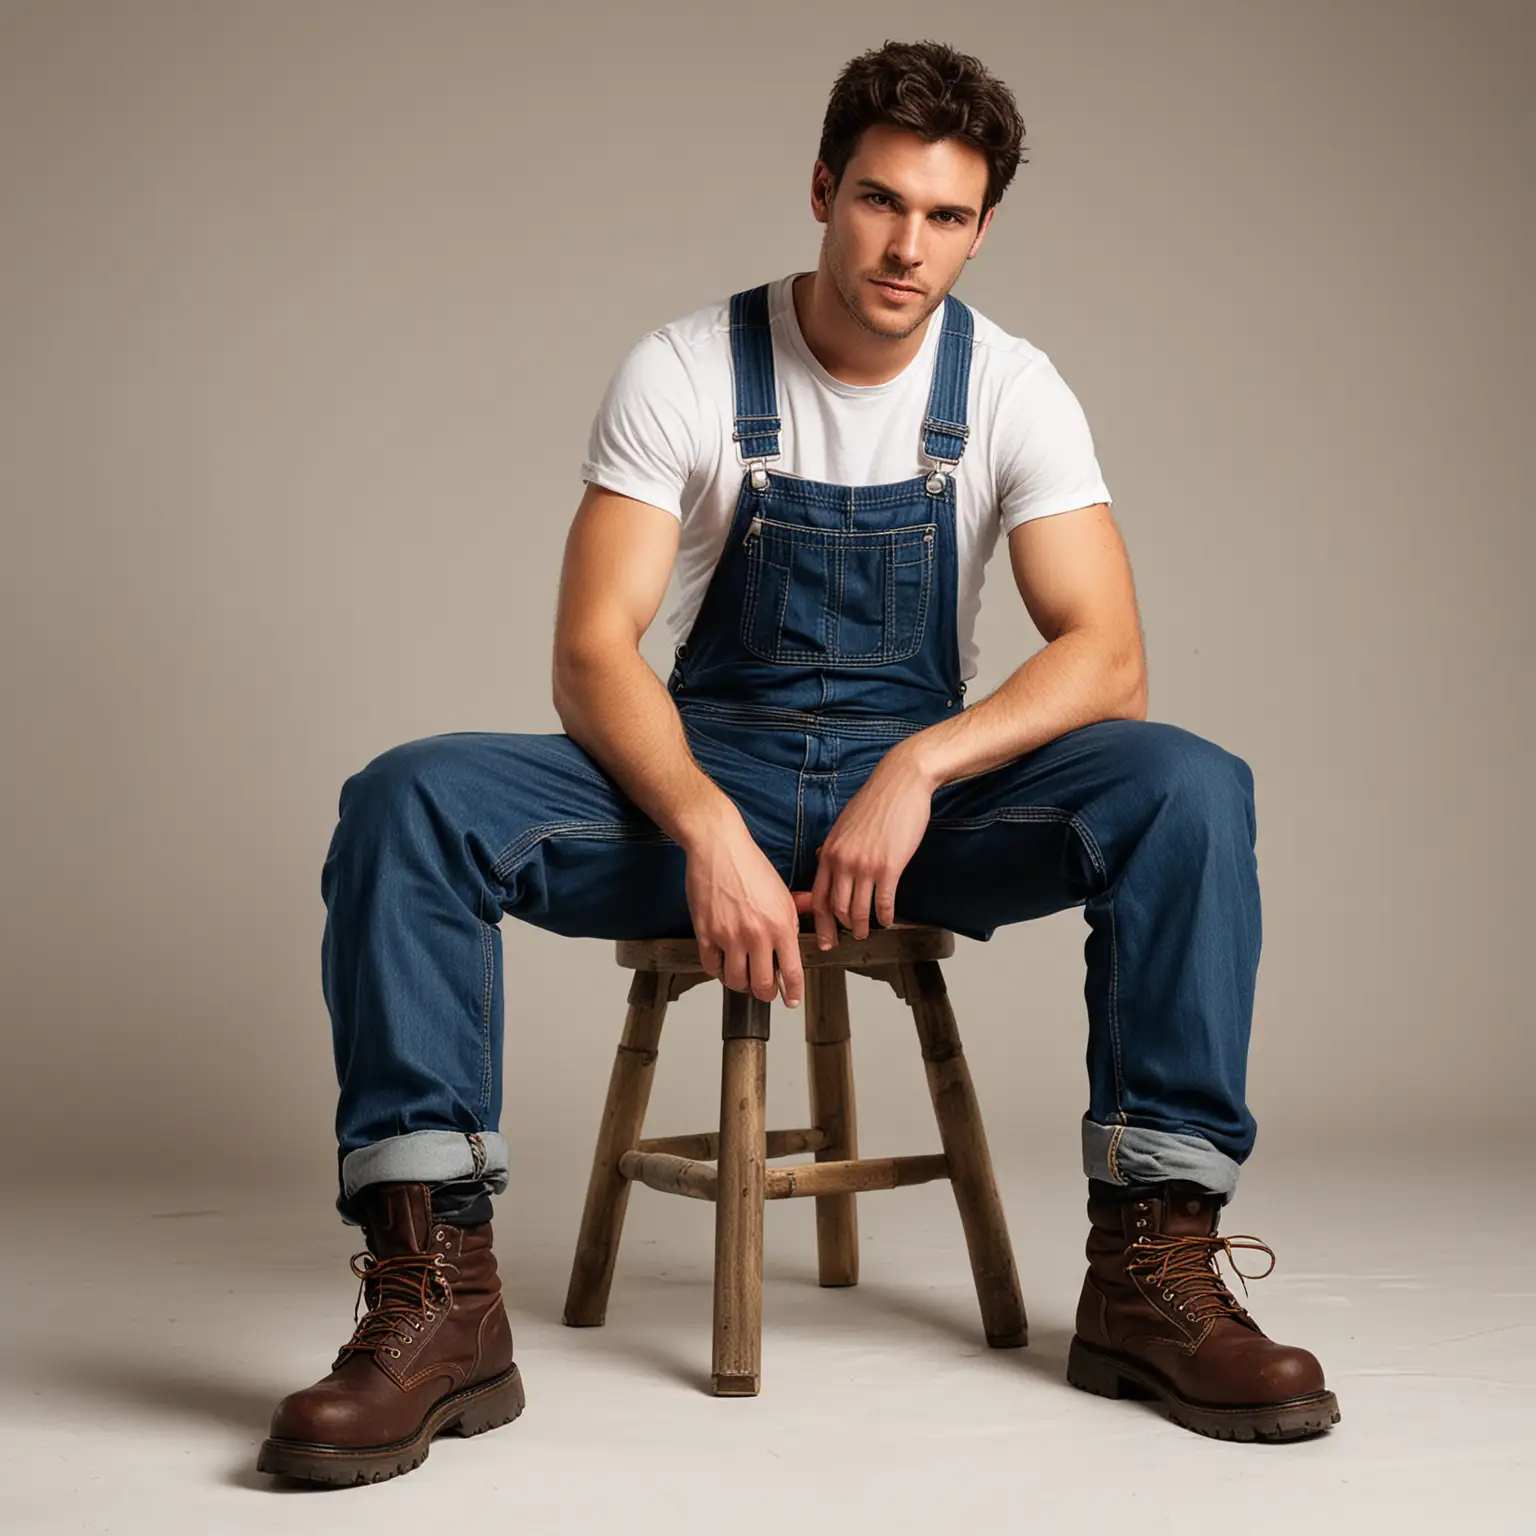 Man Relaxing in Chair Wearing Overalls and Boots